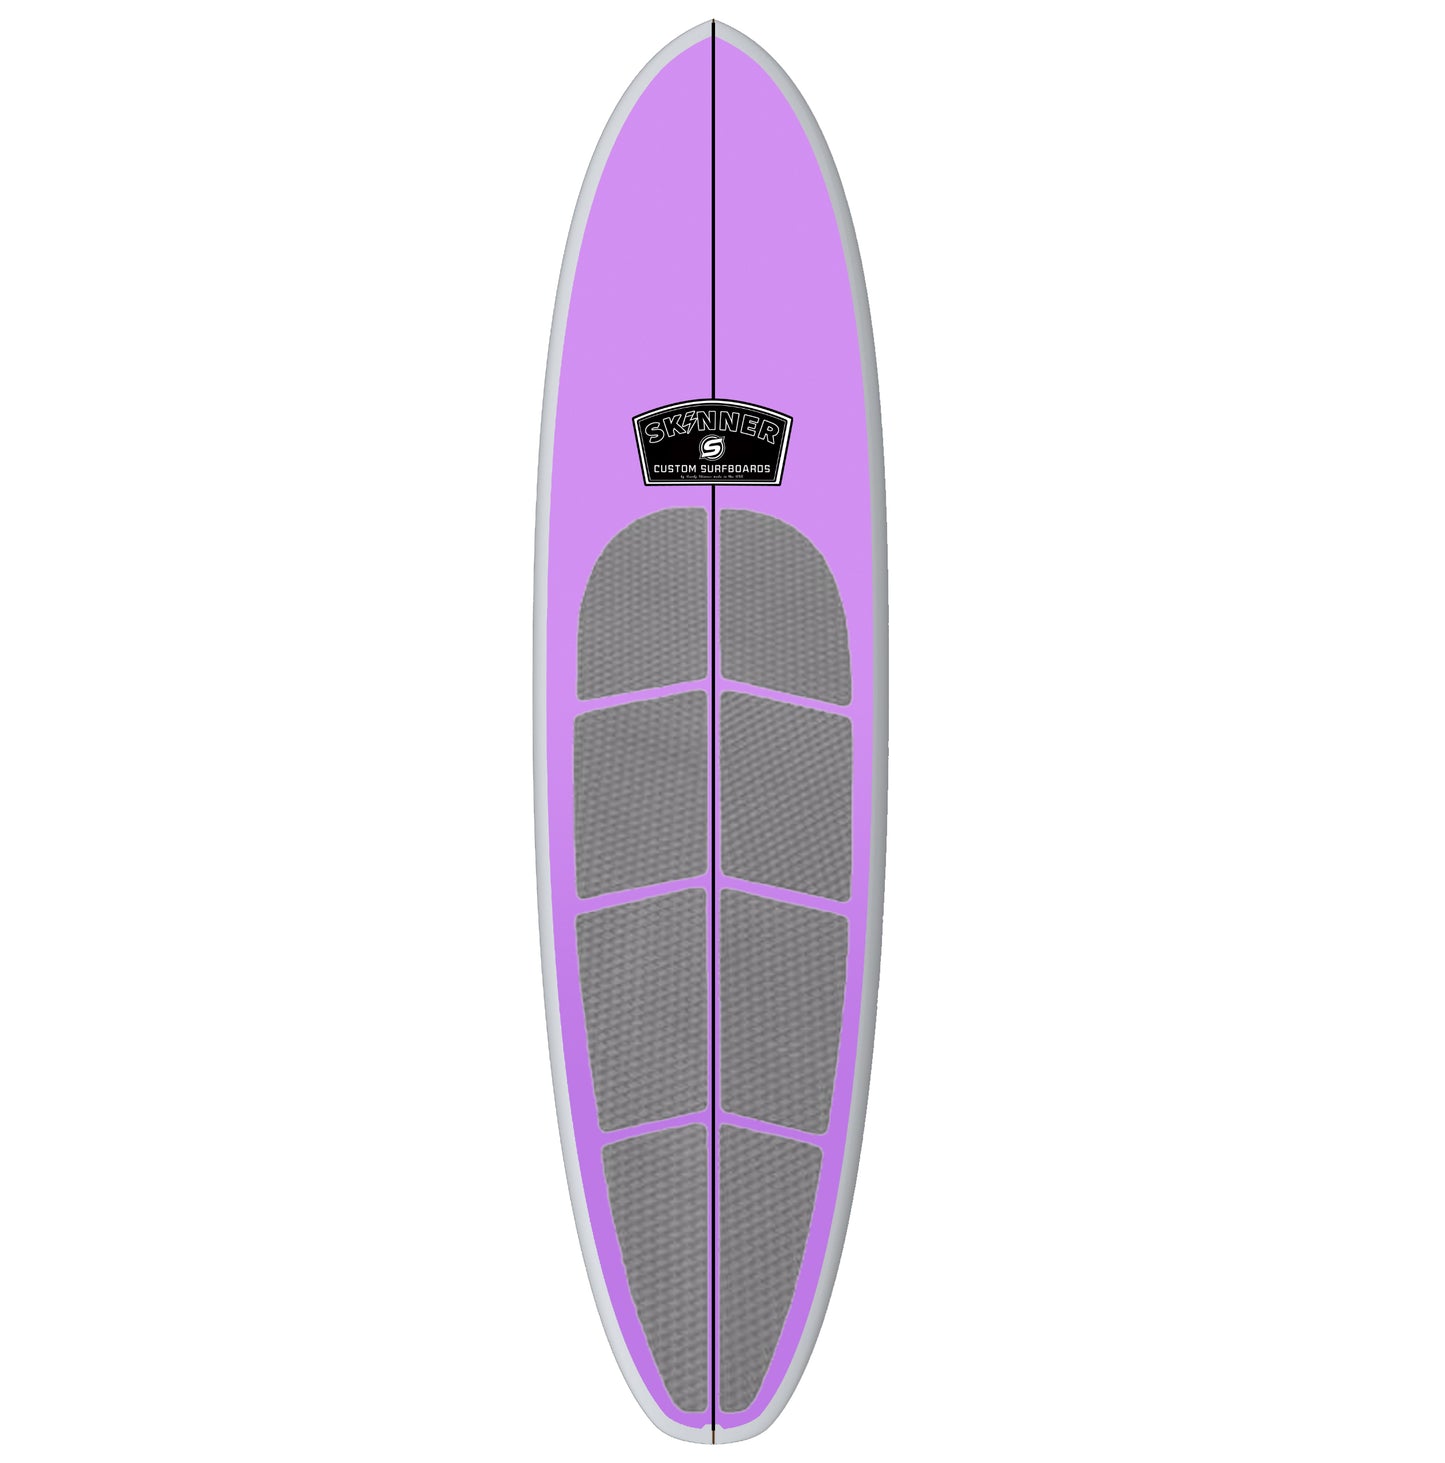 Custom Skinner Stand Up Paddle Board 10'6 x 32.25" 175L Made in the USA SUP Board